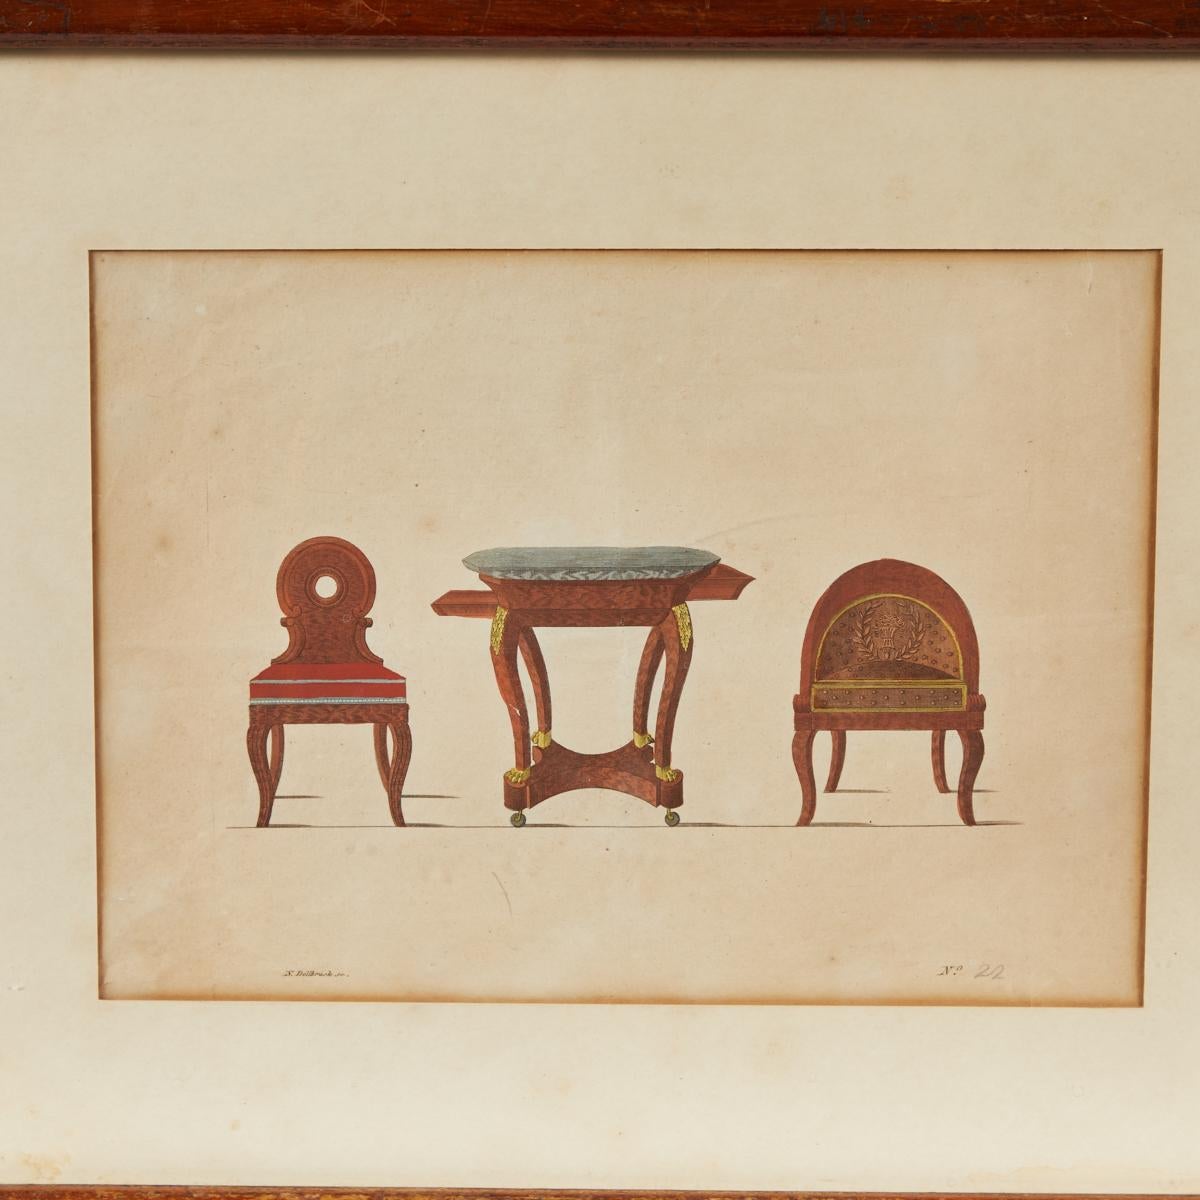 French 19th-century hand-painted illustration of three-piece furniture set on paper. The image is marked No. 22 in its bottom righthand corner, and is part of a larger series of decorative furnishing illustrations by N. Dellbruck Sr. With a